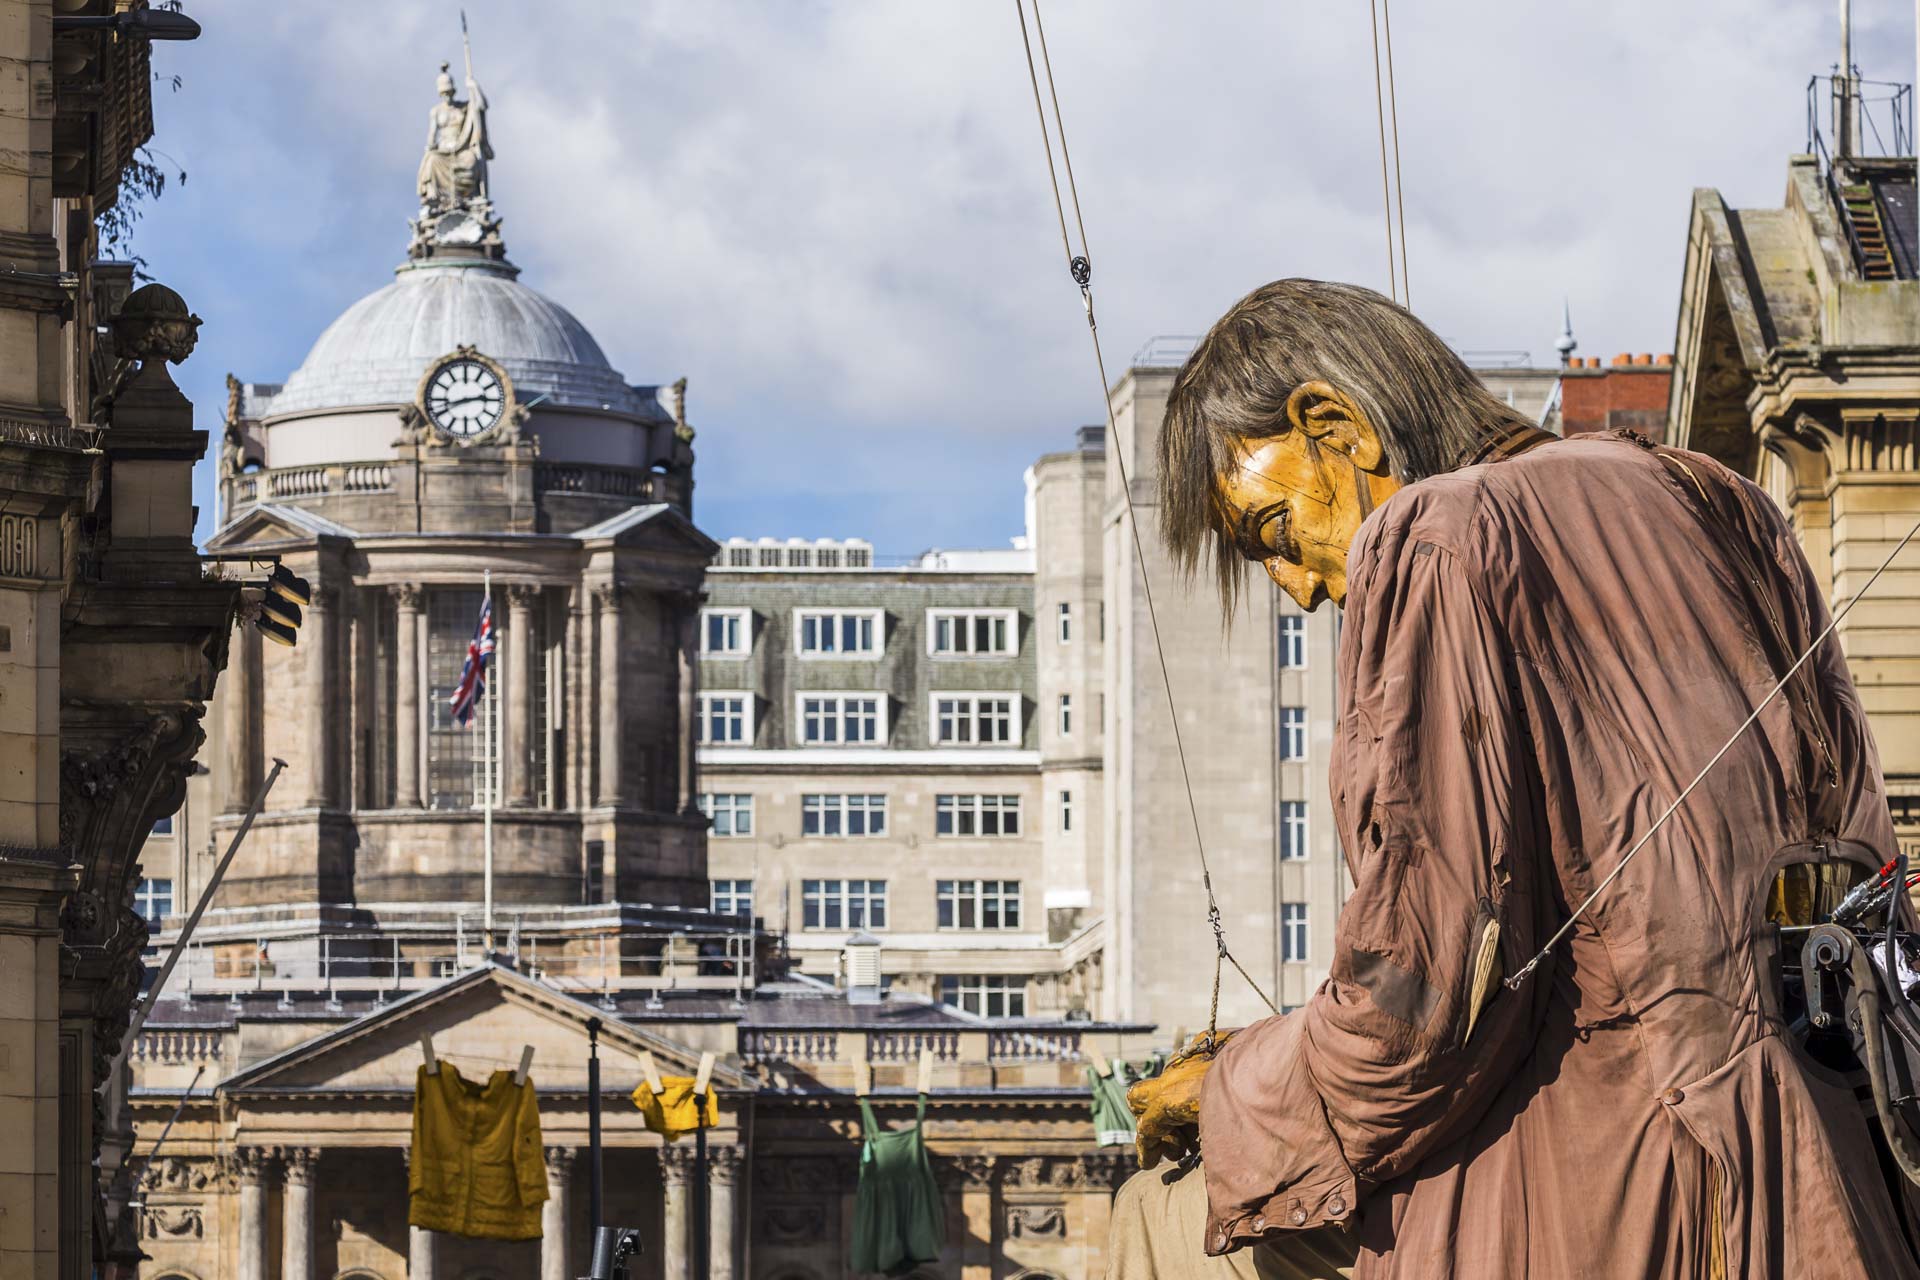 Liverpool Town Hall behind the sleeping giant man.